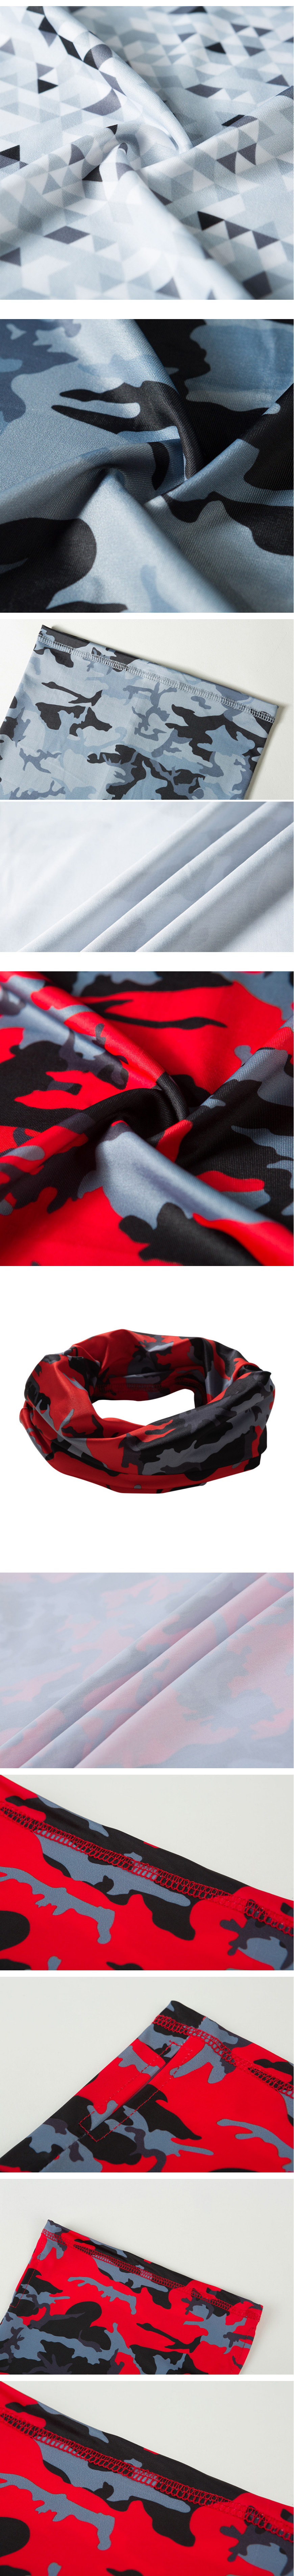 Breathable-Ice-Silk-UV-Protection-Neck-Gaiter-Half-Face-Cover-Sunscreen-Absorb-Sweat-Mask-Neck-Scarf-1677717-1